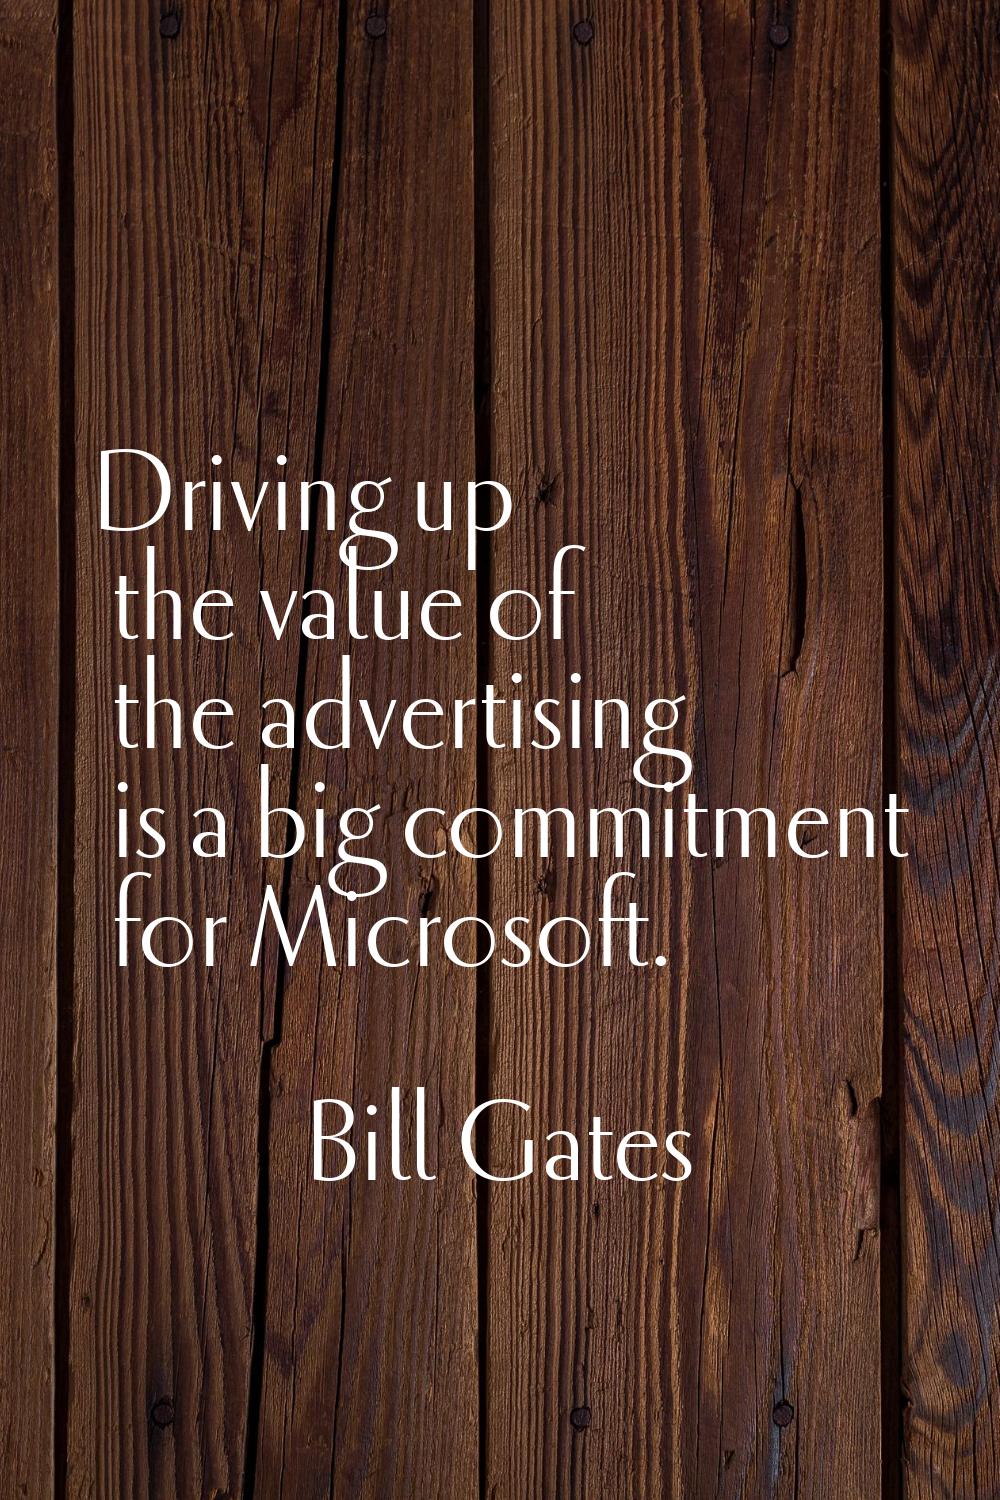 Driving up the value of the advertising is a big commitment for Microsoft.